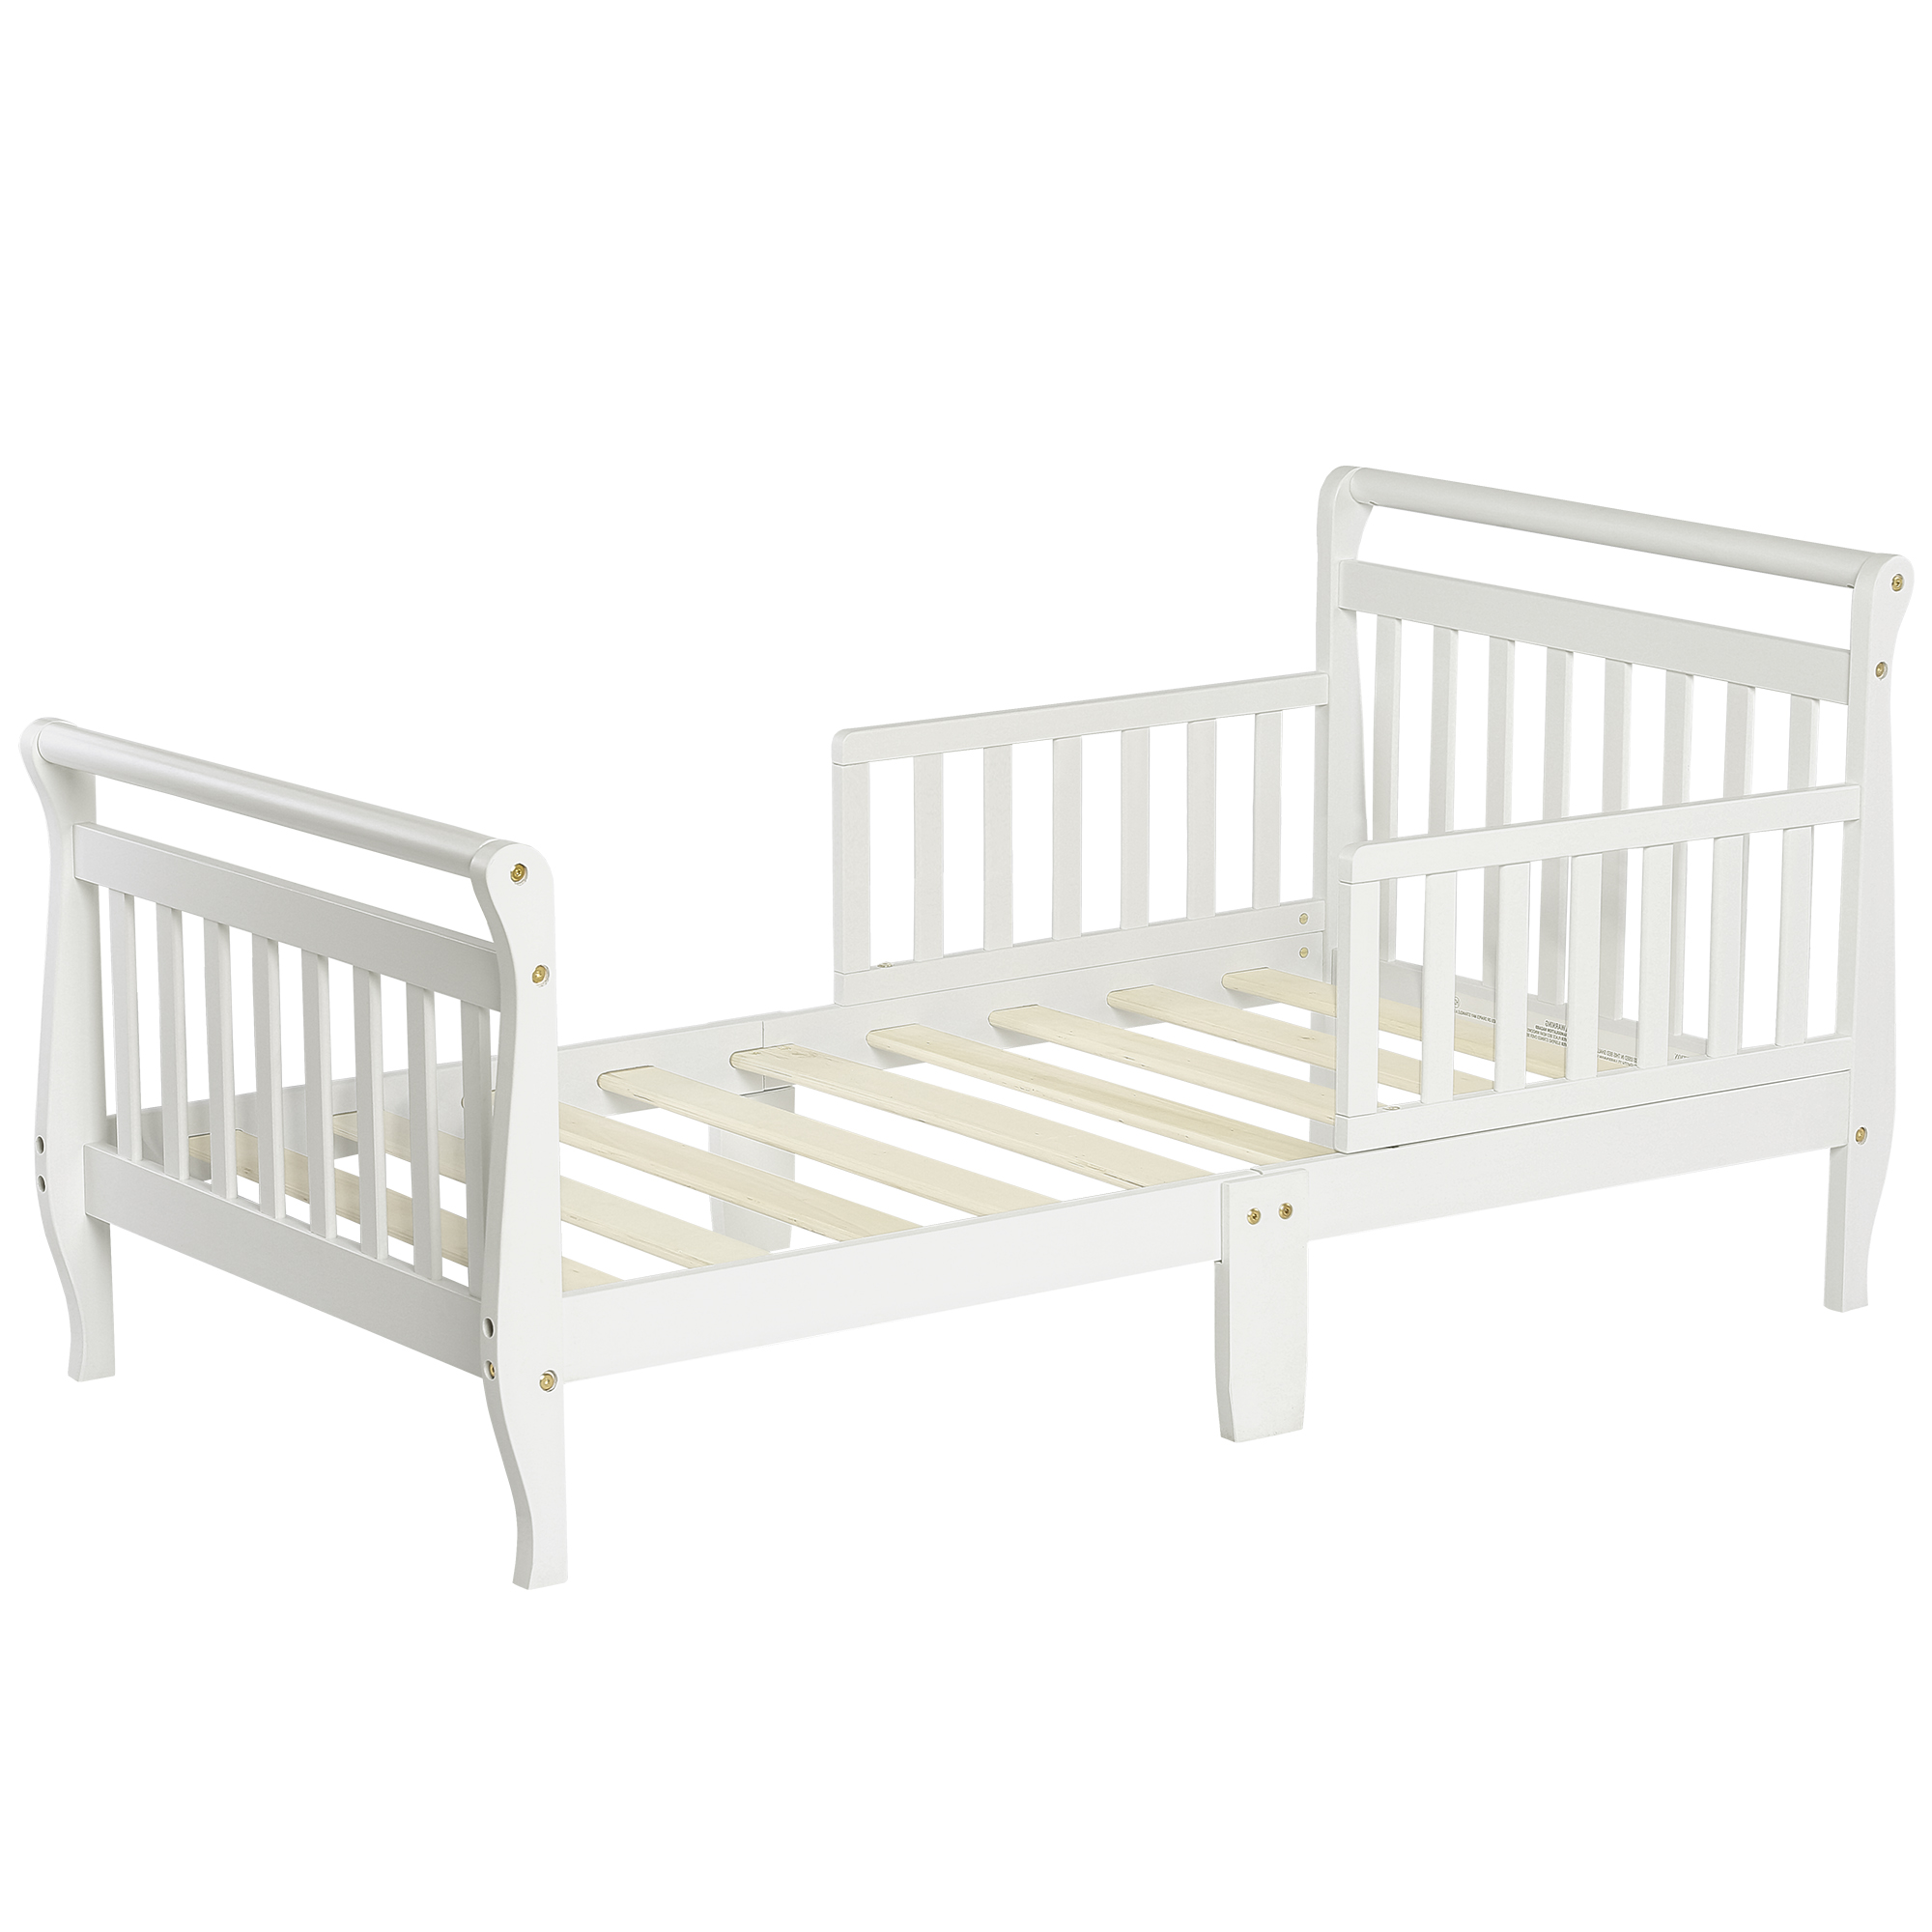 Dream On Me Sleigh Toddler Bed, White - image 2 of 4